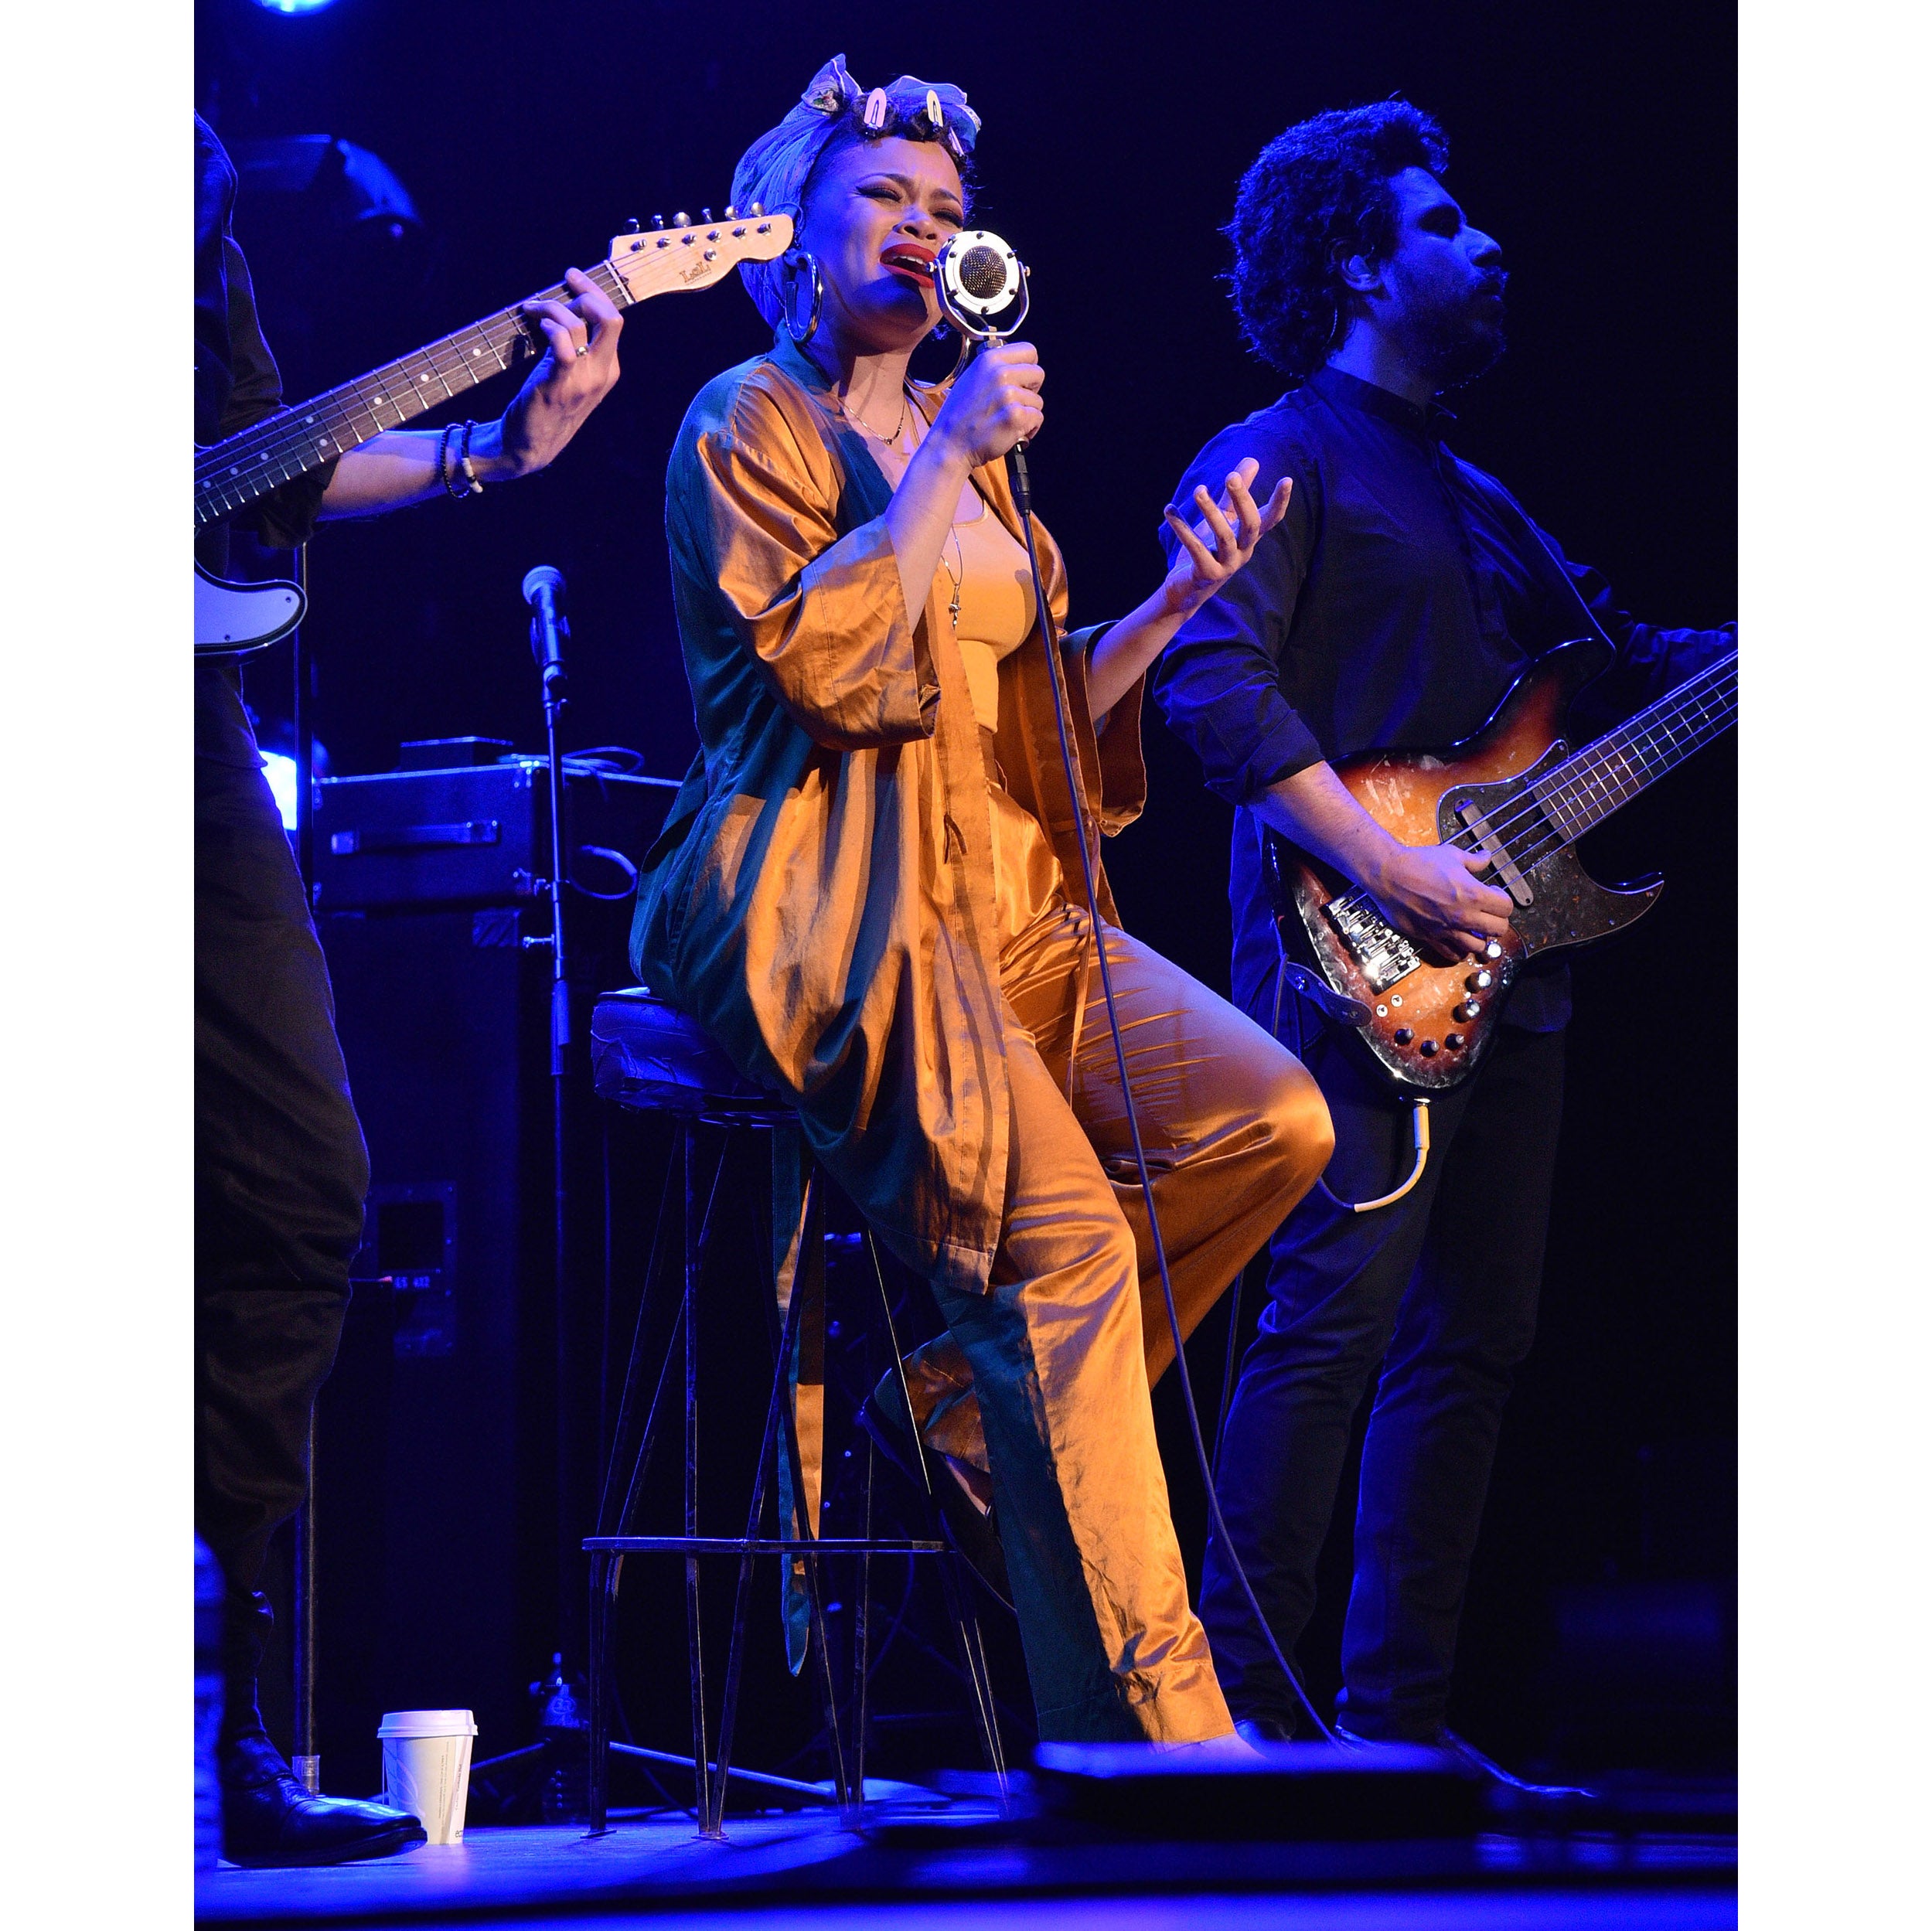 ESSENCE Fest Artist Andra Day Rises Up Even Higher in New Video